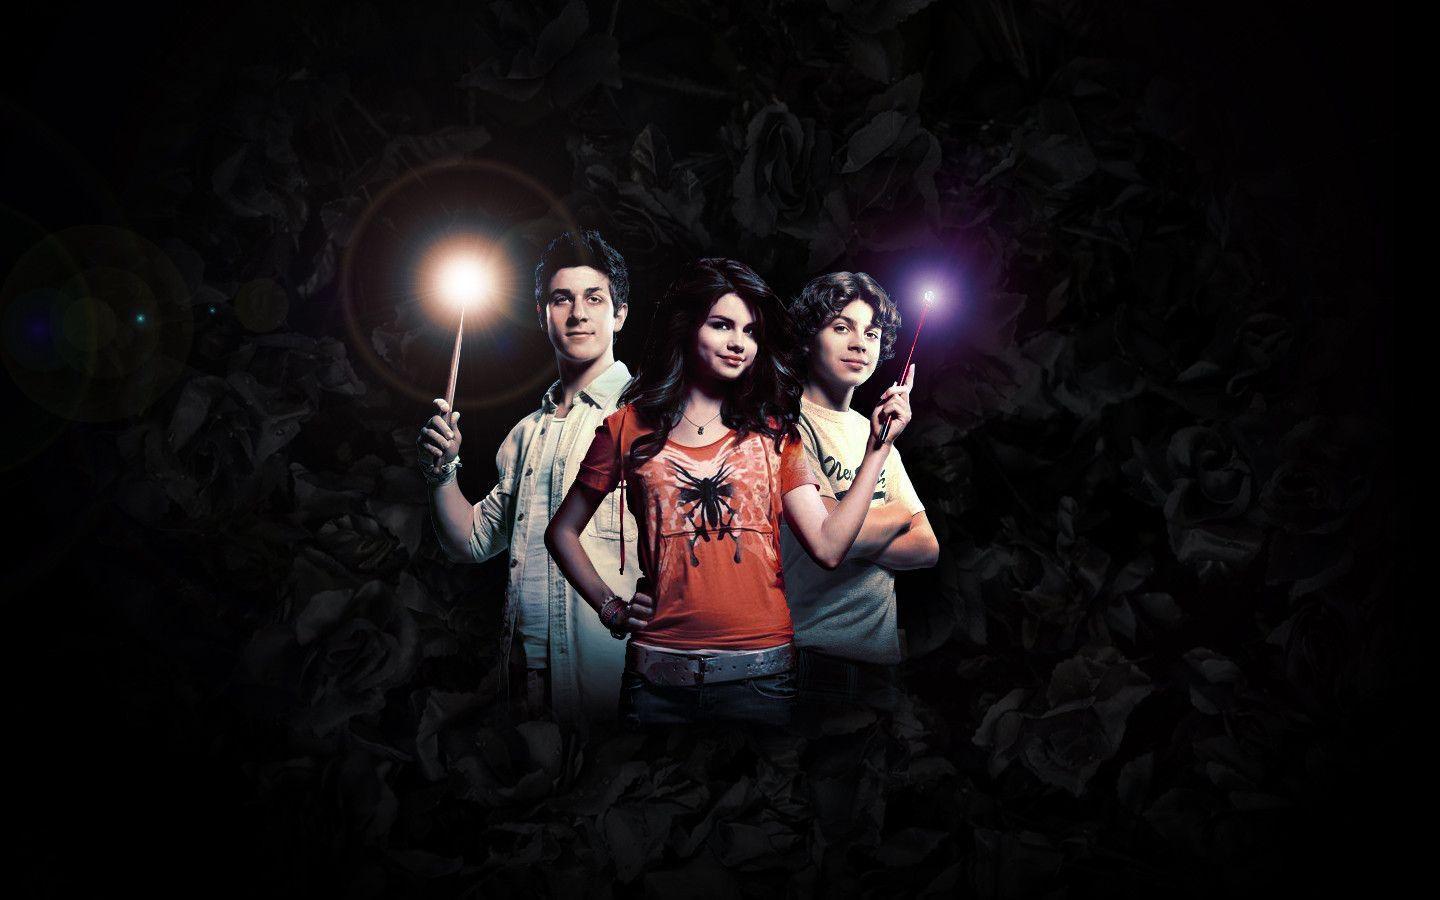 WizardsOfWaverlyPlace! of Waverly Place Wallpaper